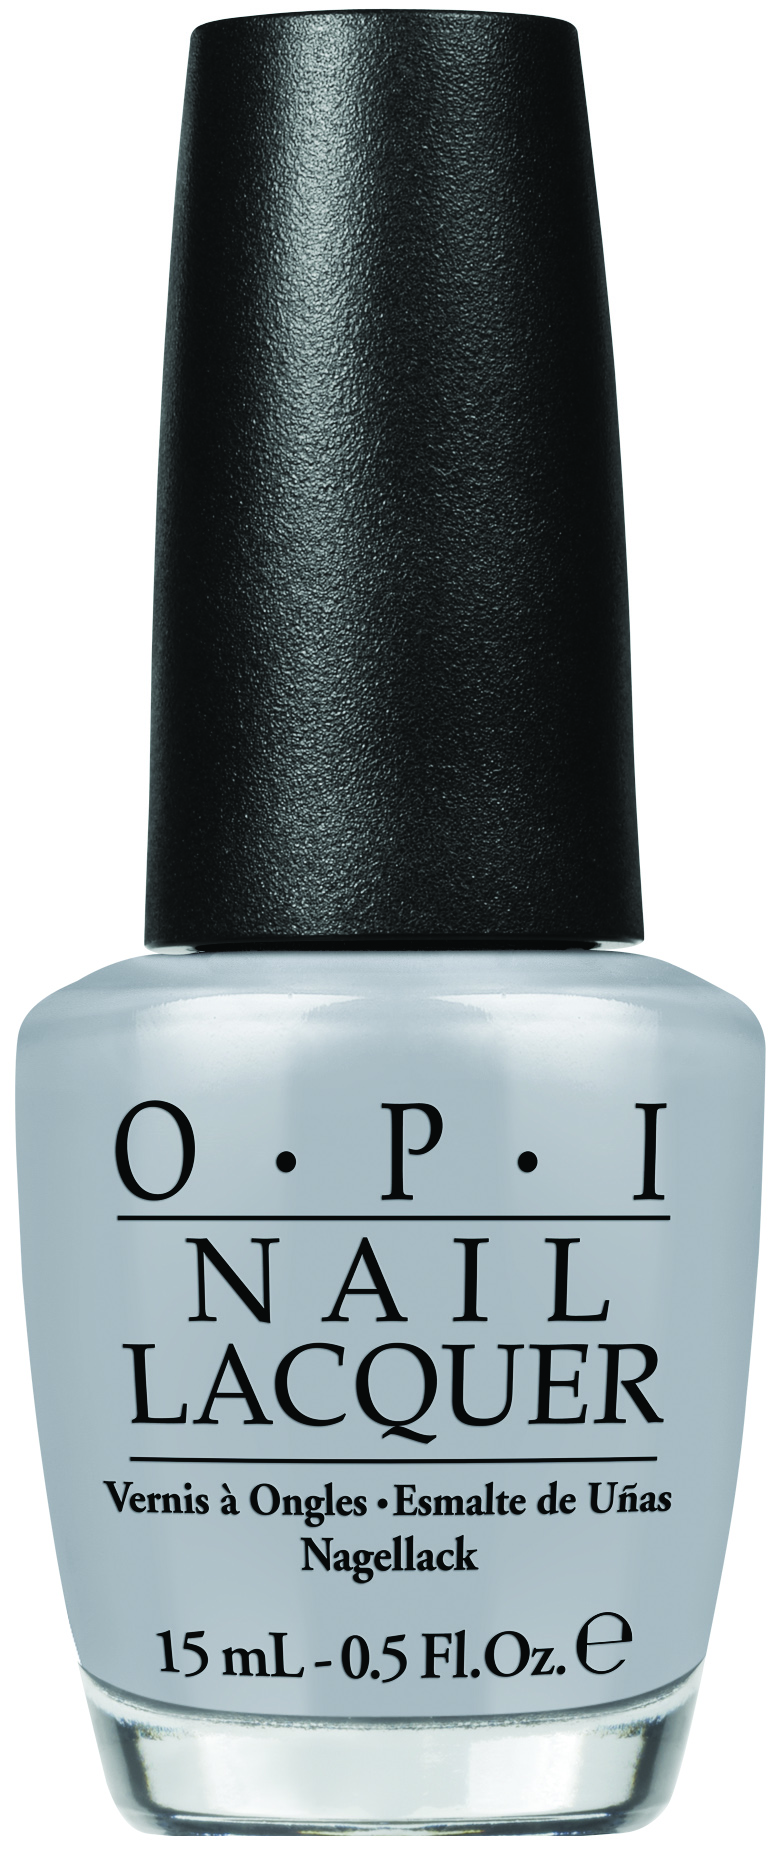 Opi, Cement The Deal 16,80 €.